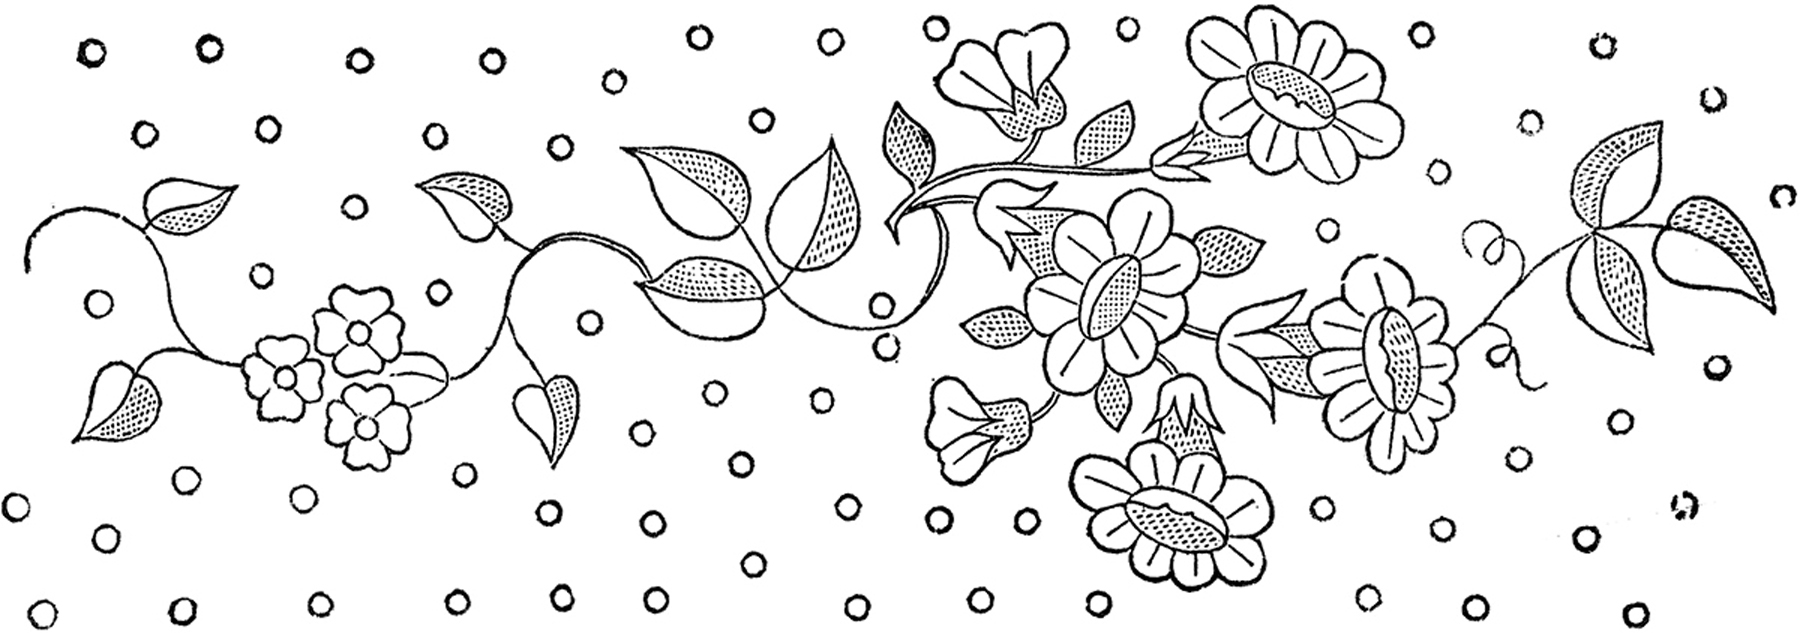 Free Embroidery Designs Patterns Floral Embroidery Patterns Pretty The Graphics Fairy